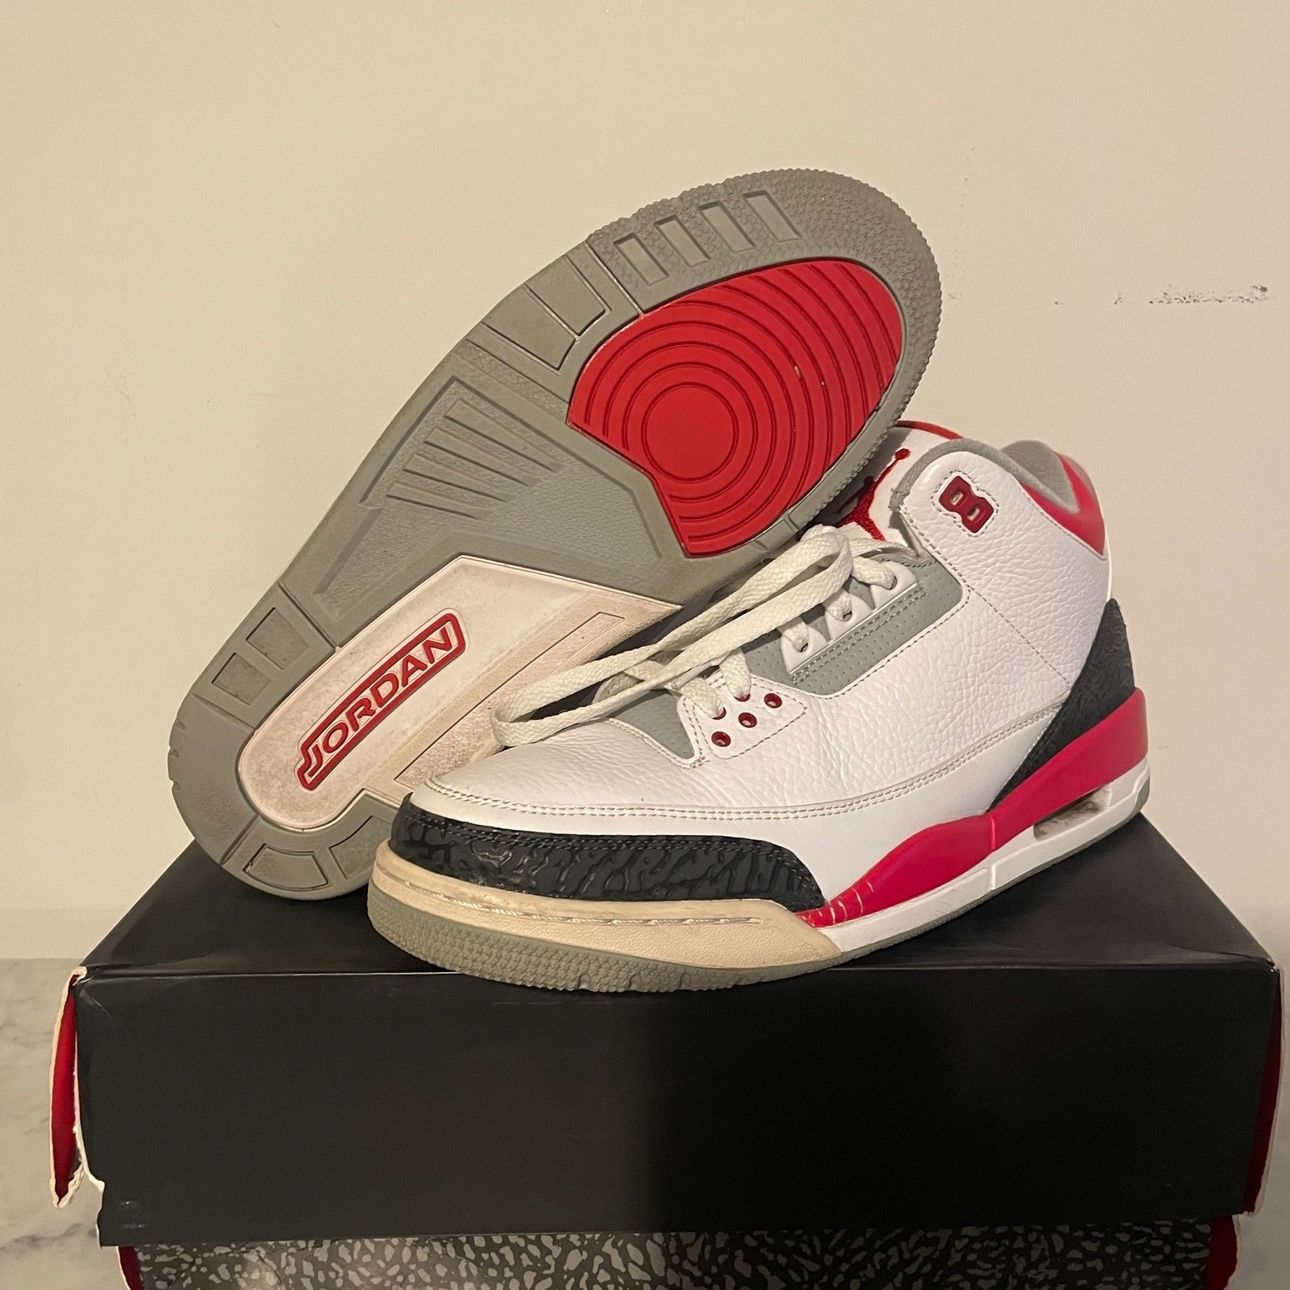 Jordan 3 Fire Red Size 11.5 CLEAN WITH BOX 